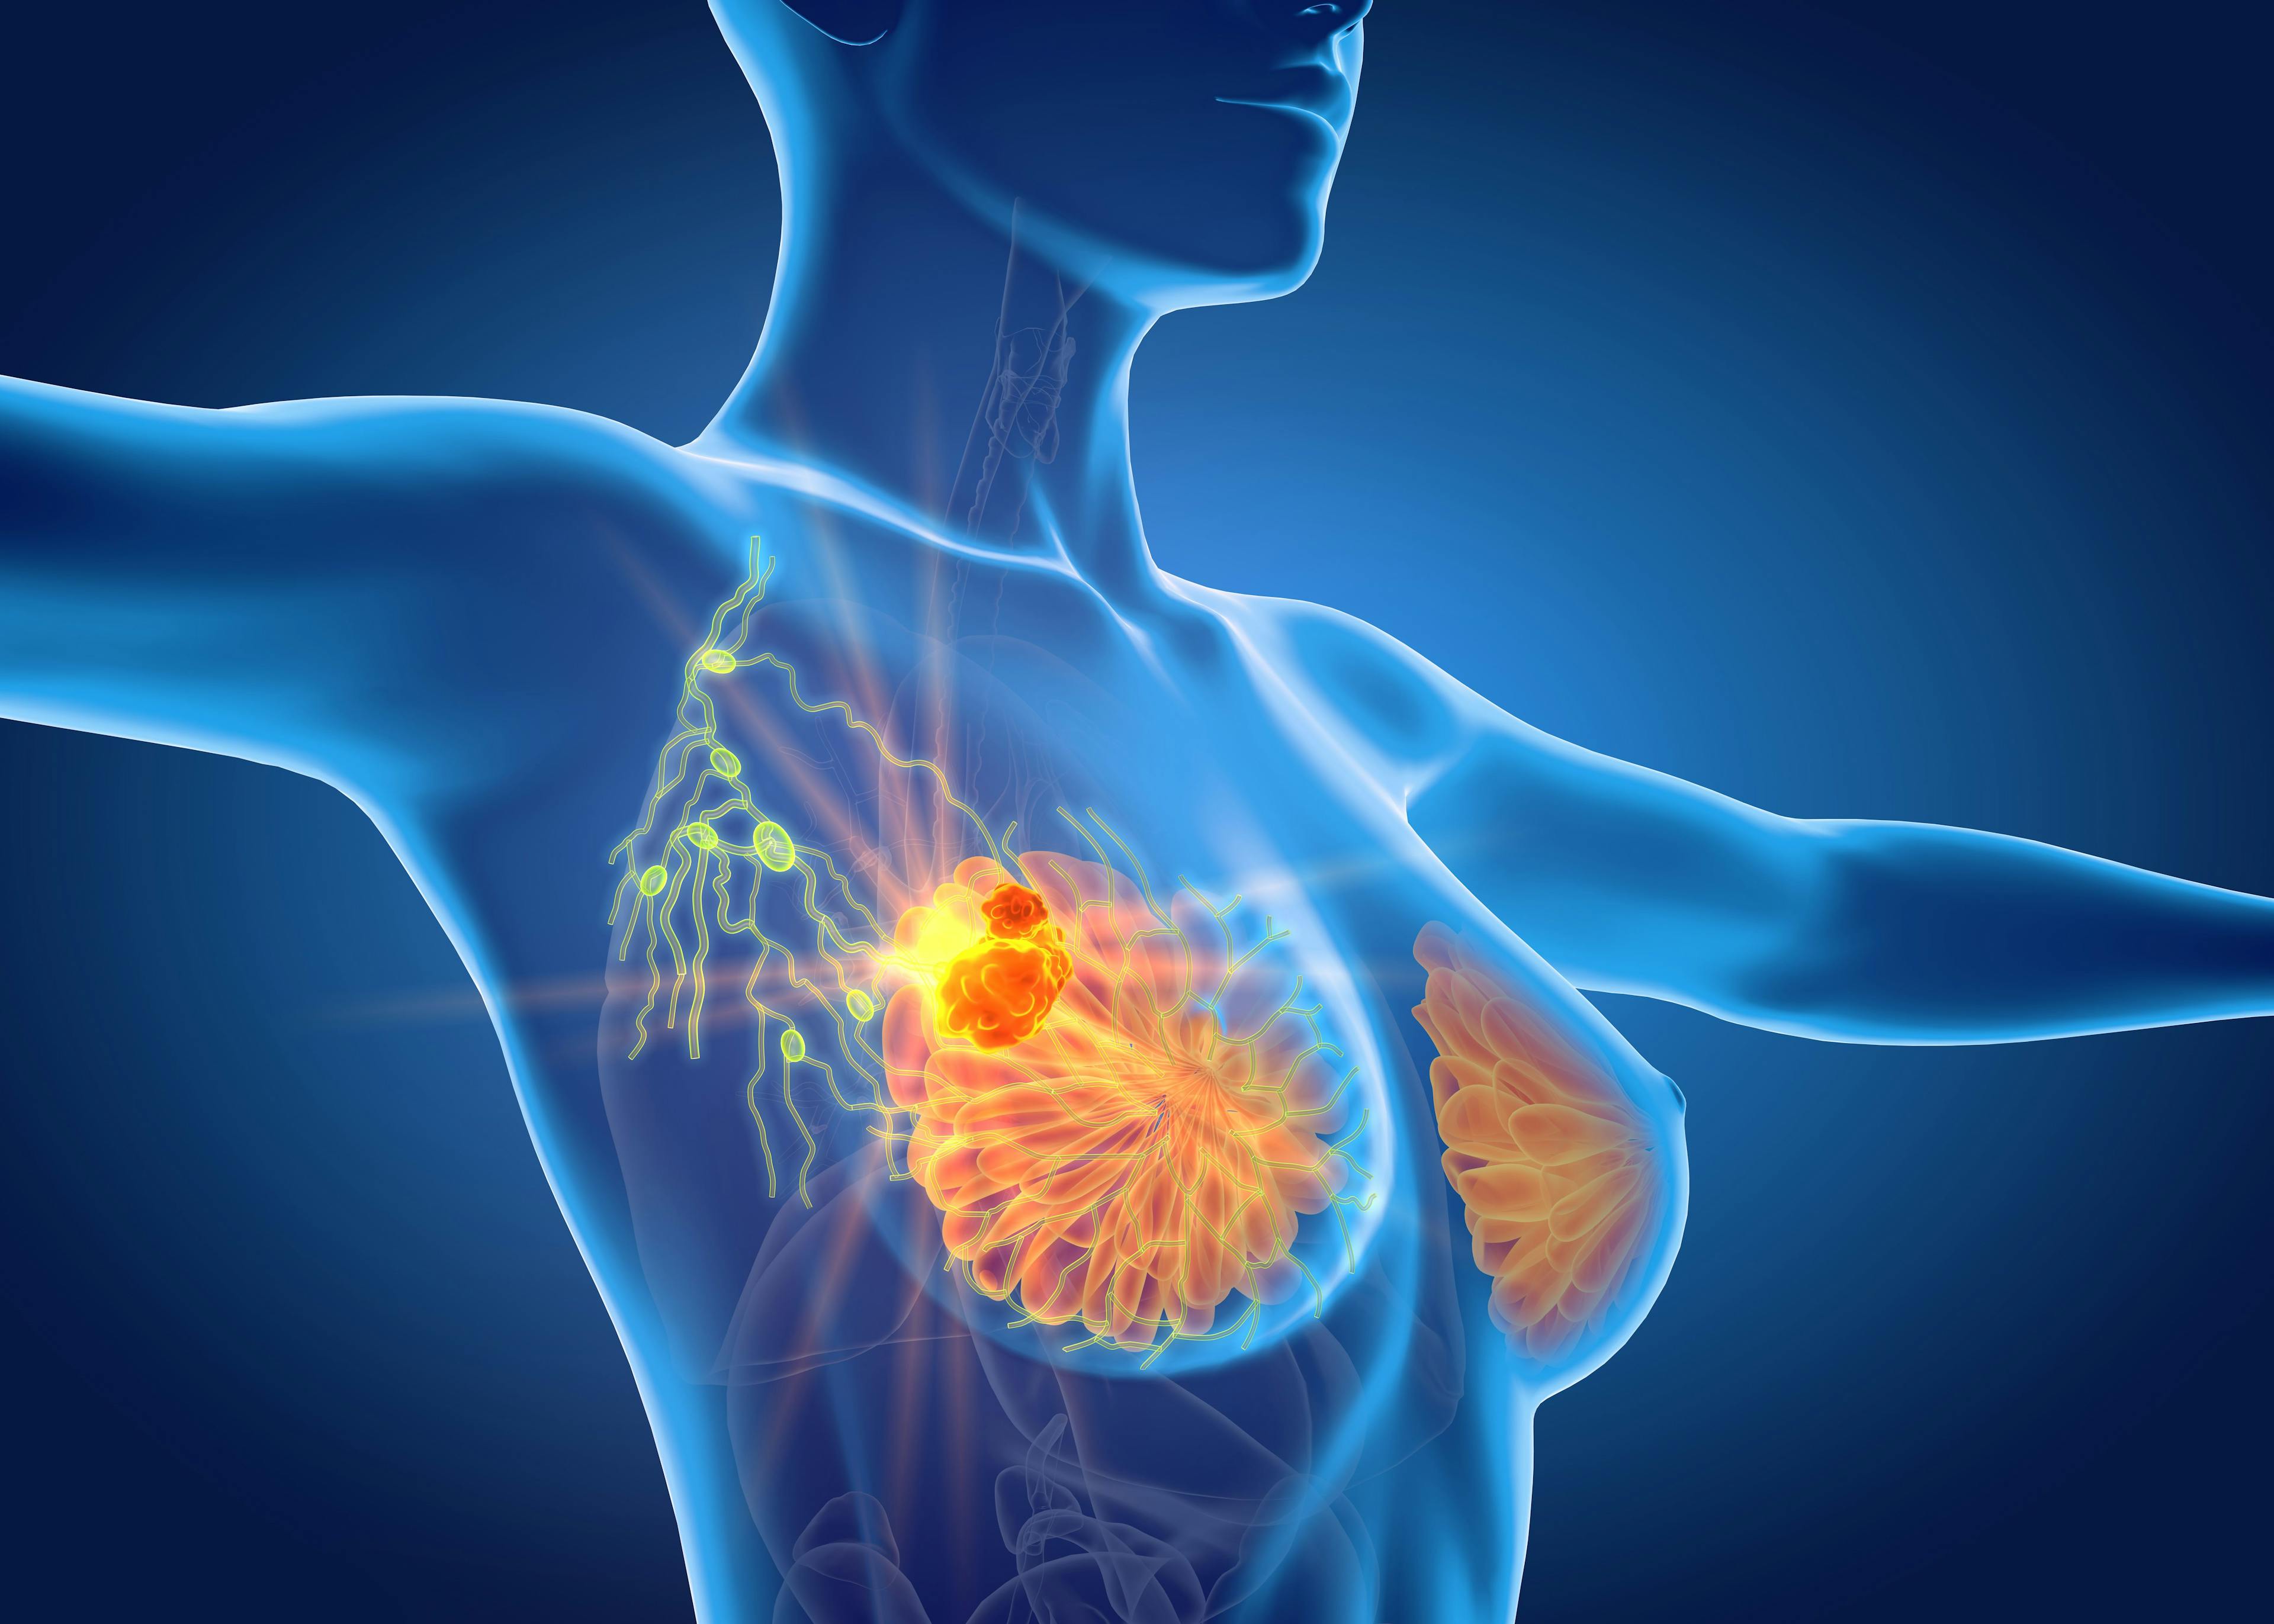 New Breast Cancer Combination Treatment May Help With Gene Mutations